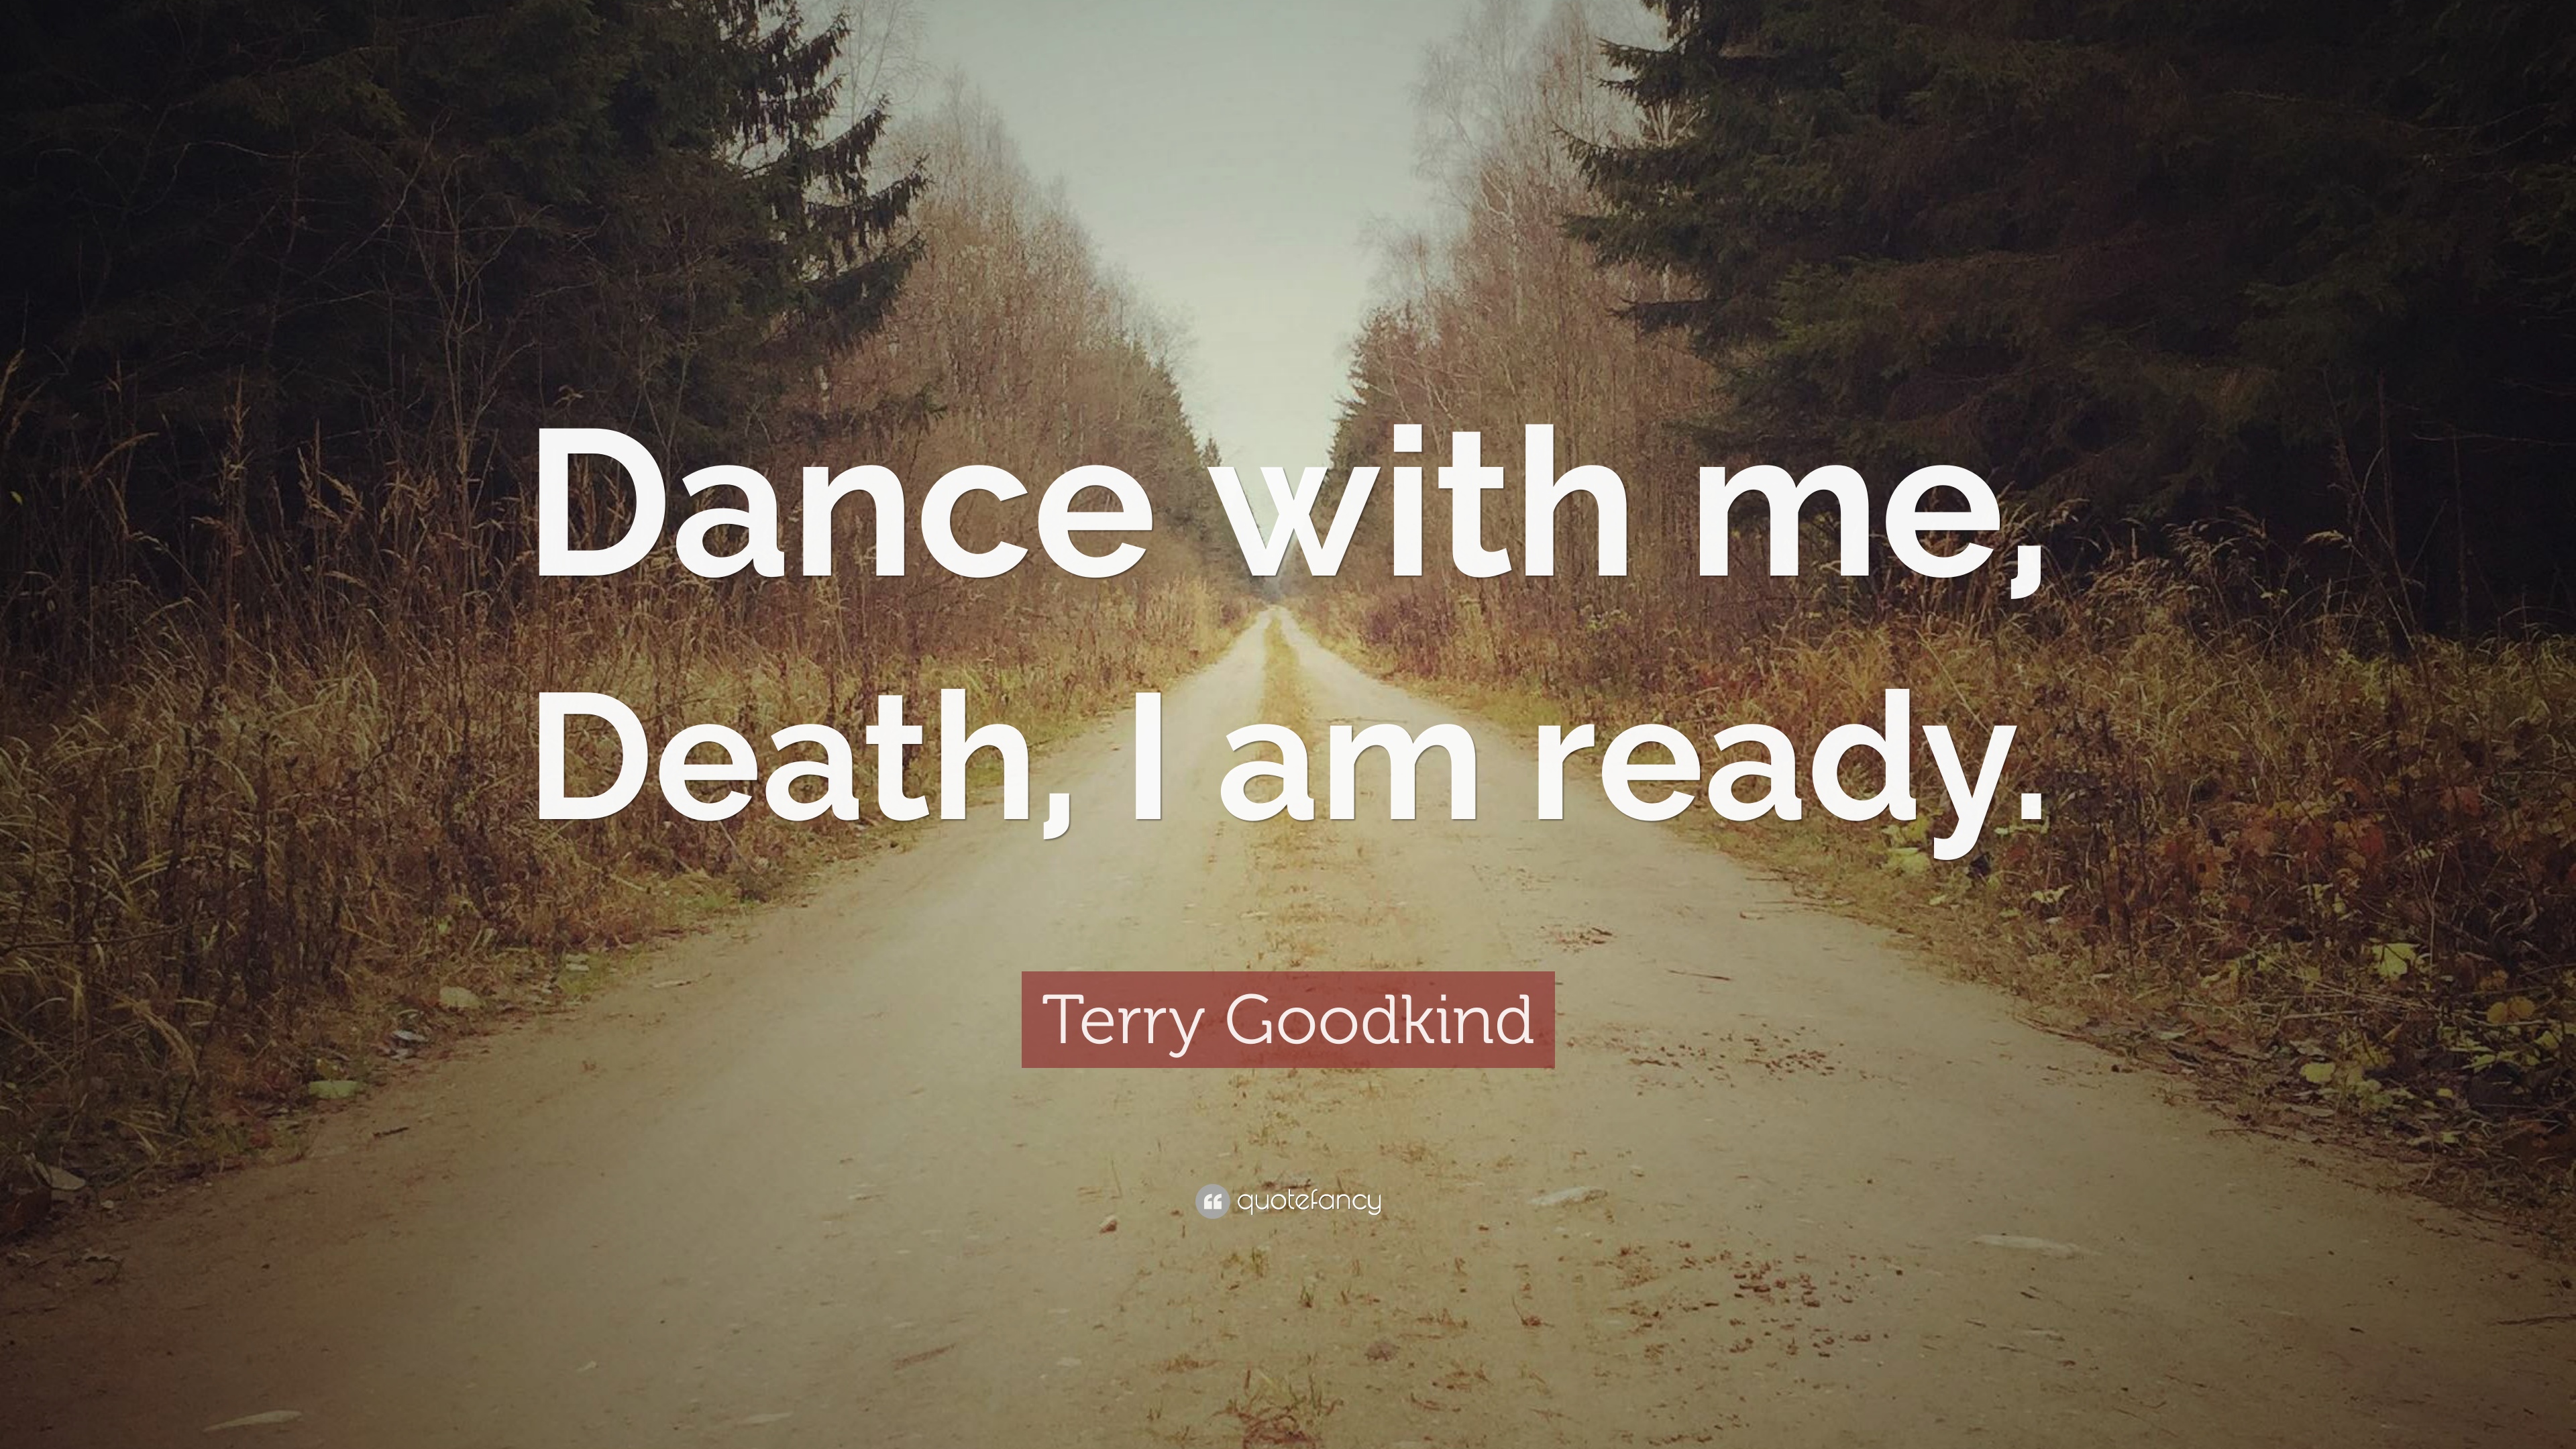 Terry Goodkind Quote: “Dance with me, Death, I am ready.” (12 ...